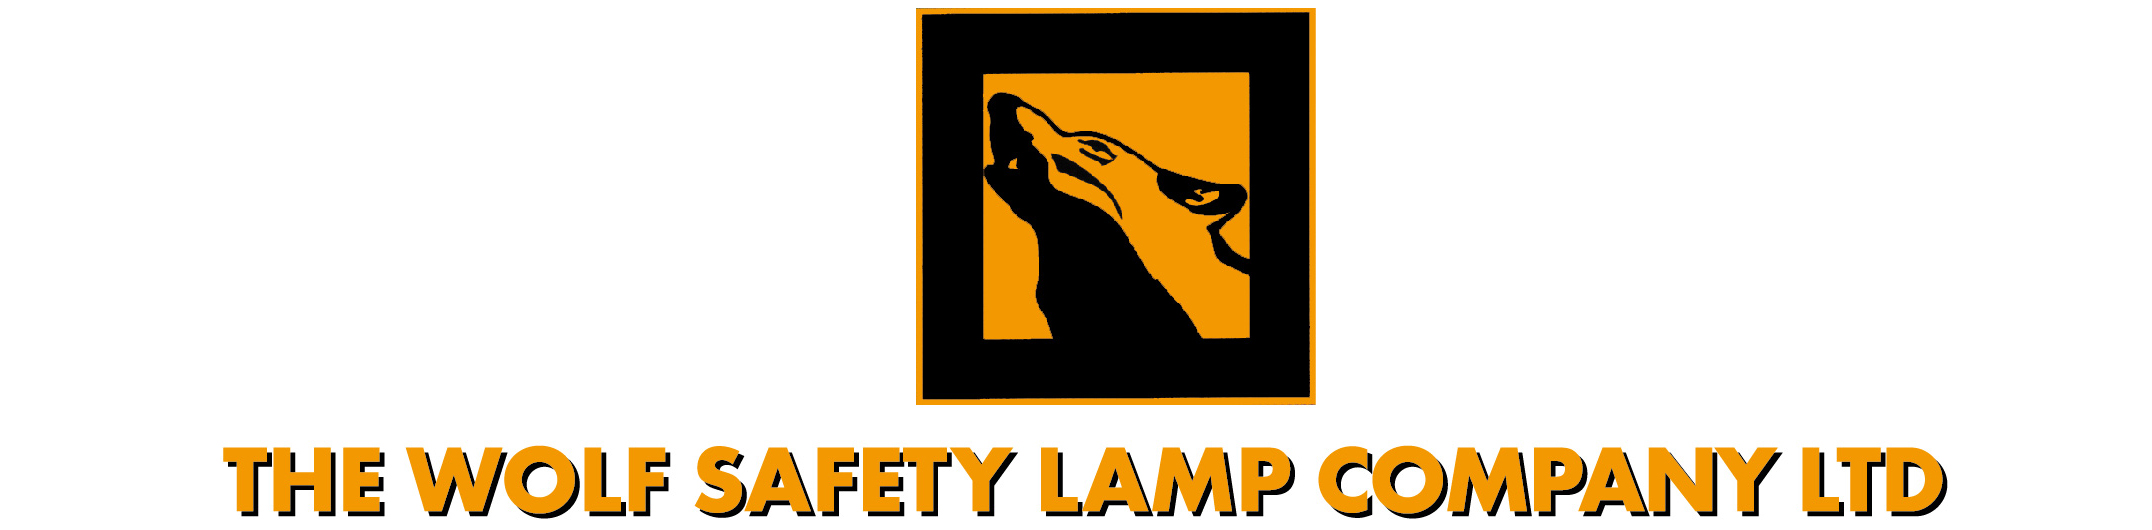 THE WOLF SAFETY LAMP COMPANY LTD